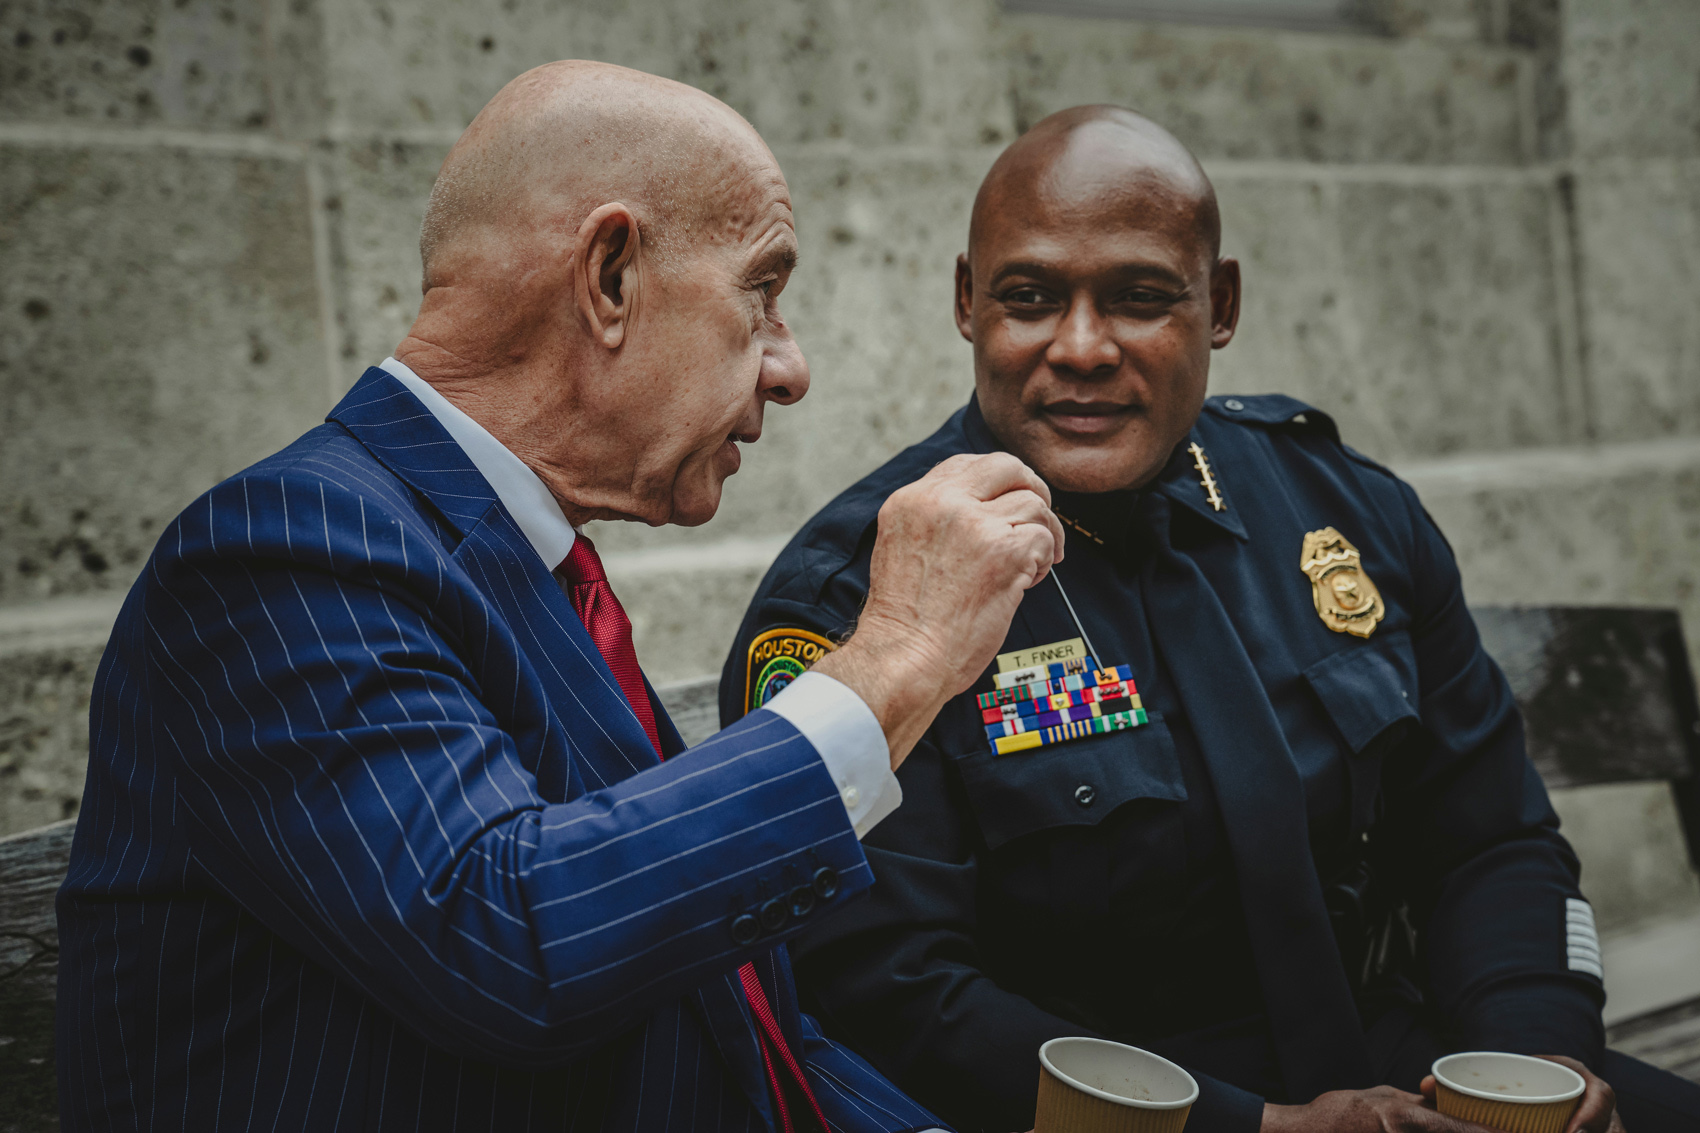 Houston Mayor John Whitmire drinks hot chocolate with Houston Police Chief Troy Finner on Jan. 2 outside of City Hall.